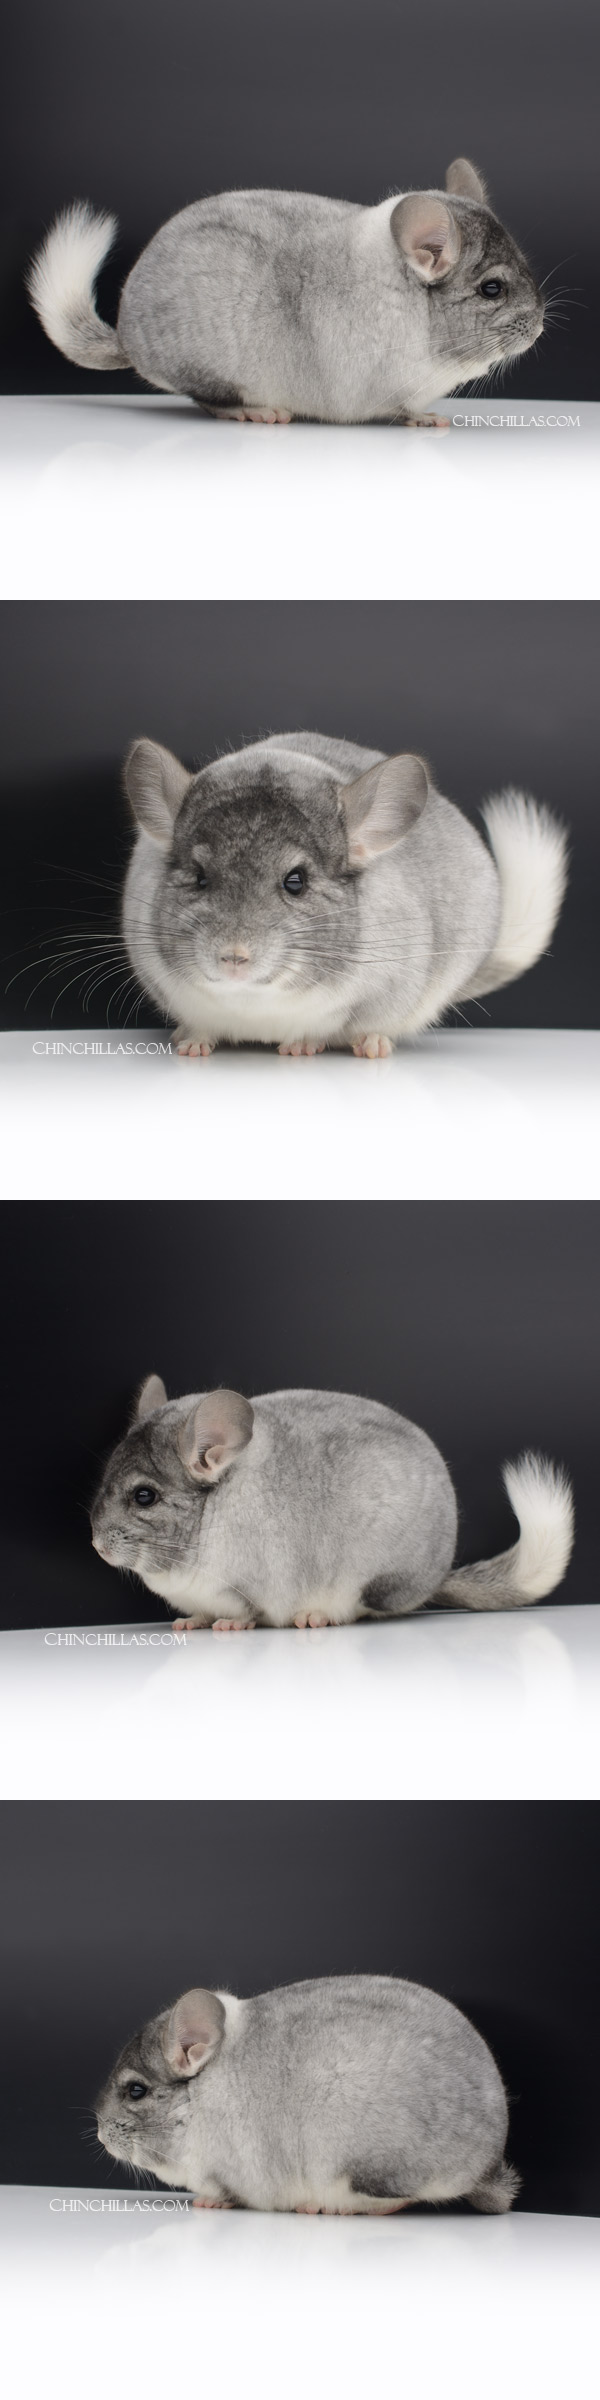 Chinchilla or related item offered for sale or export on Chinchillas.com - 23055 Blocky Show Quality Tri-tone White Mosaic Male Chinchilla